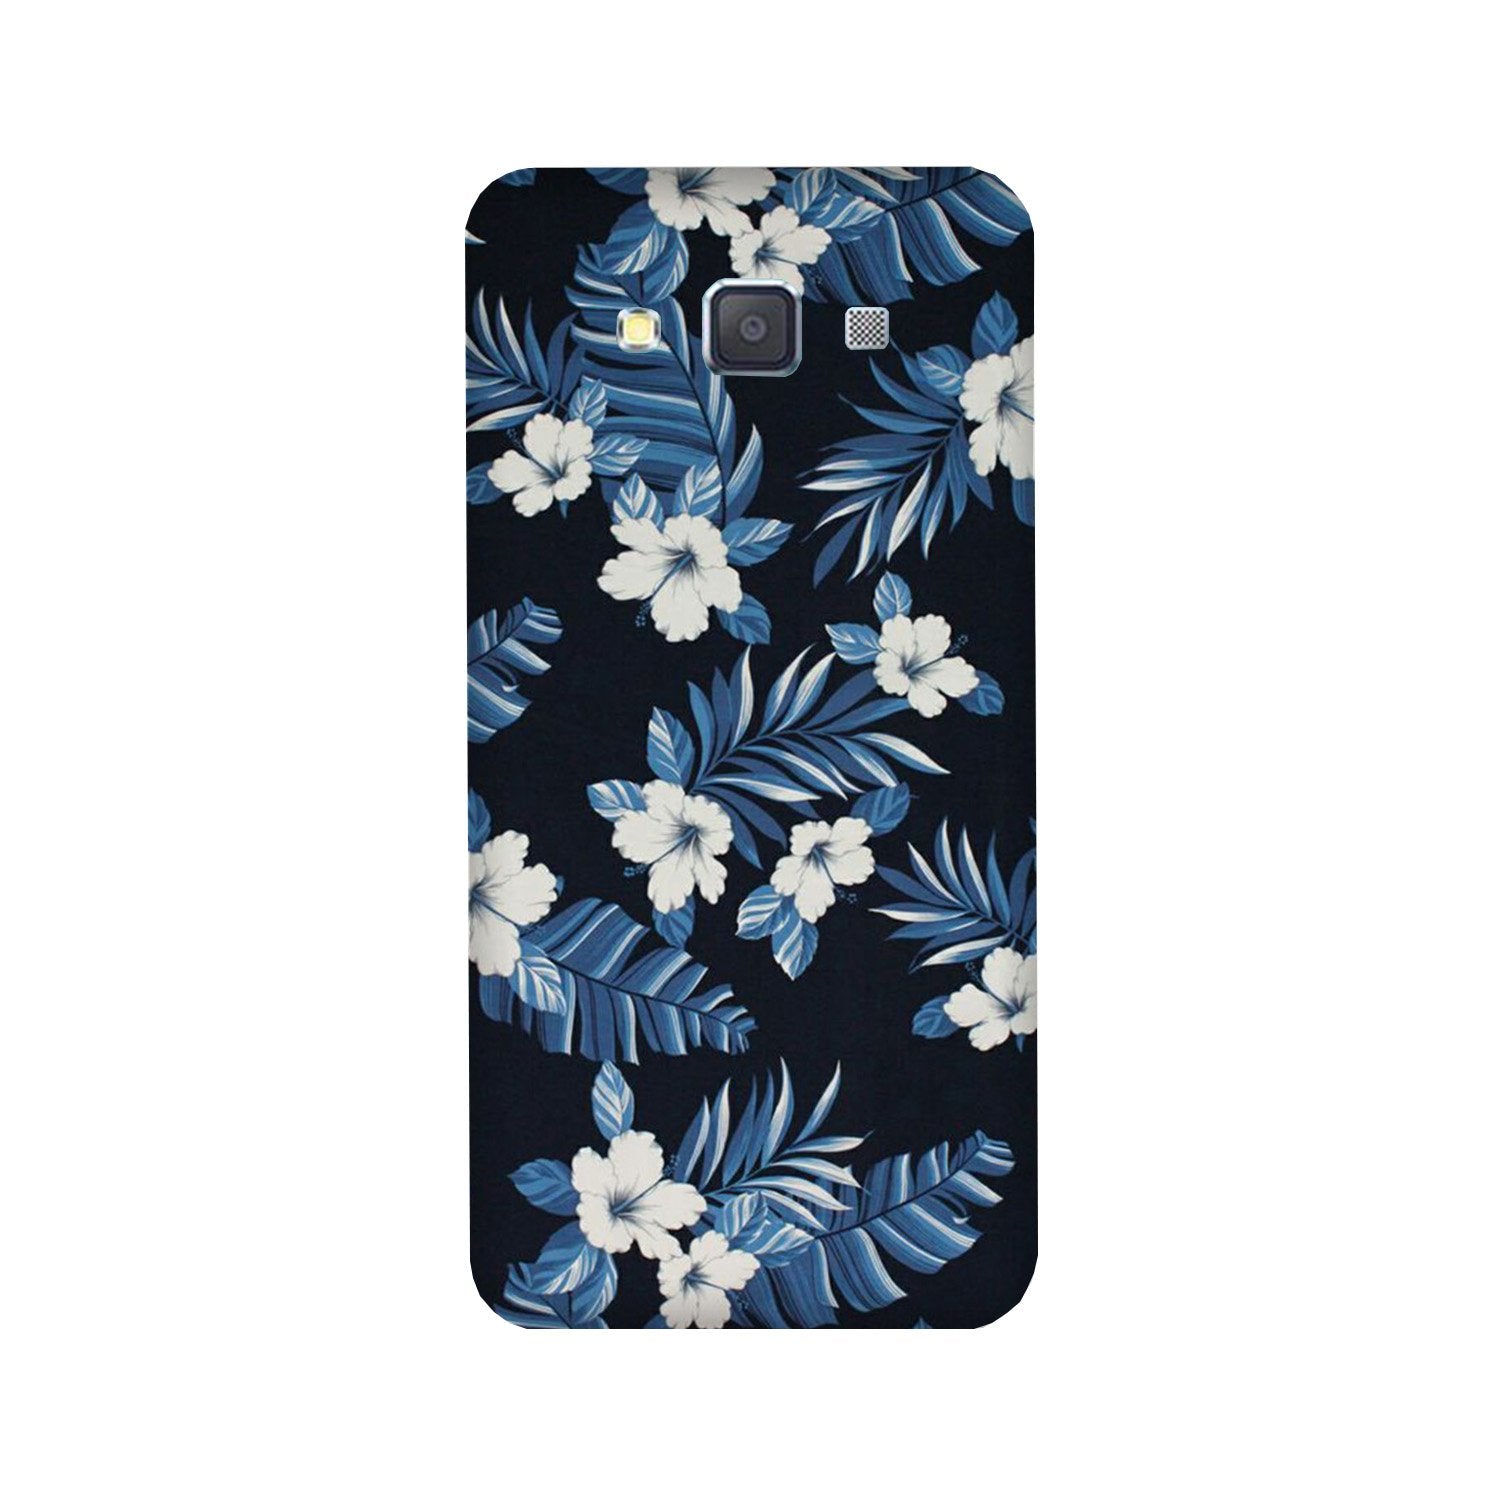 White flowers Blue Background2 Case for Galaxy A5 (2015)